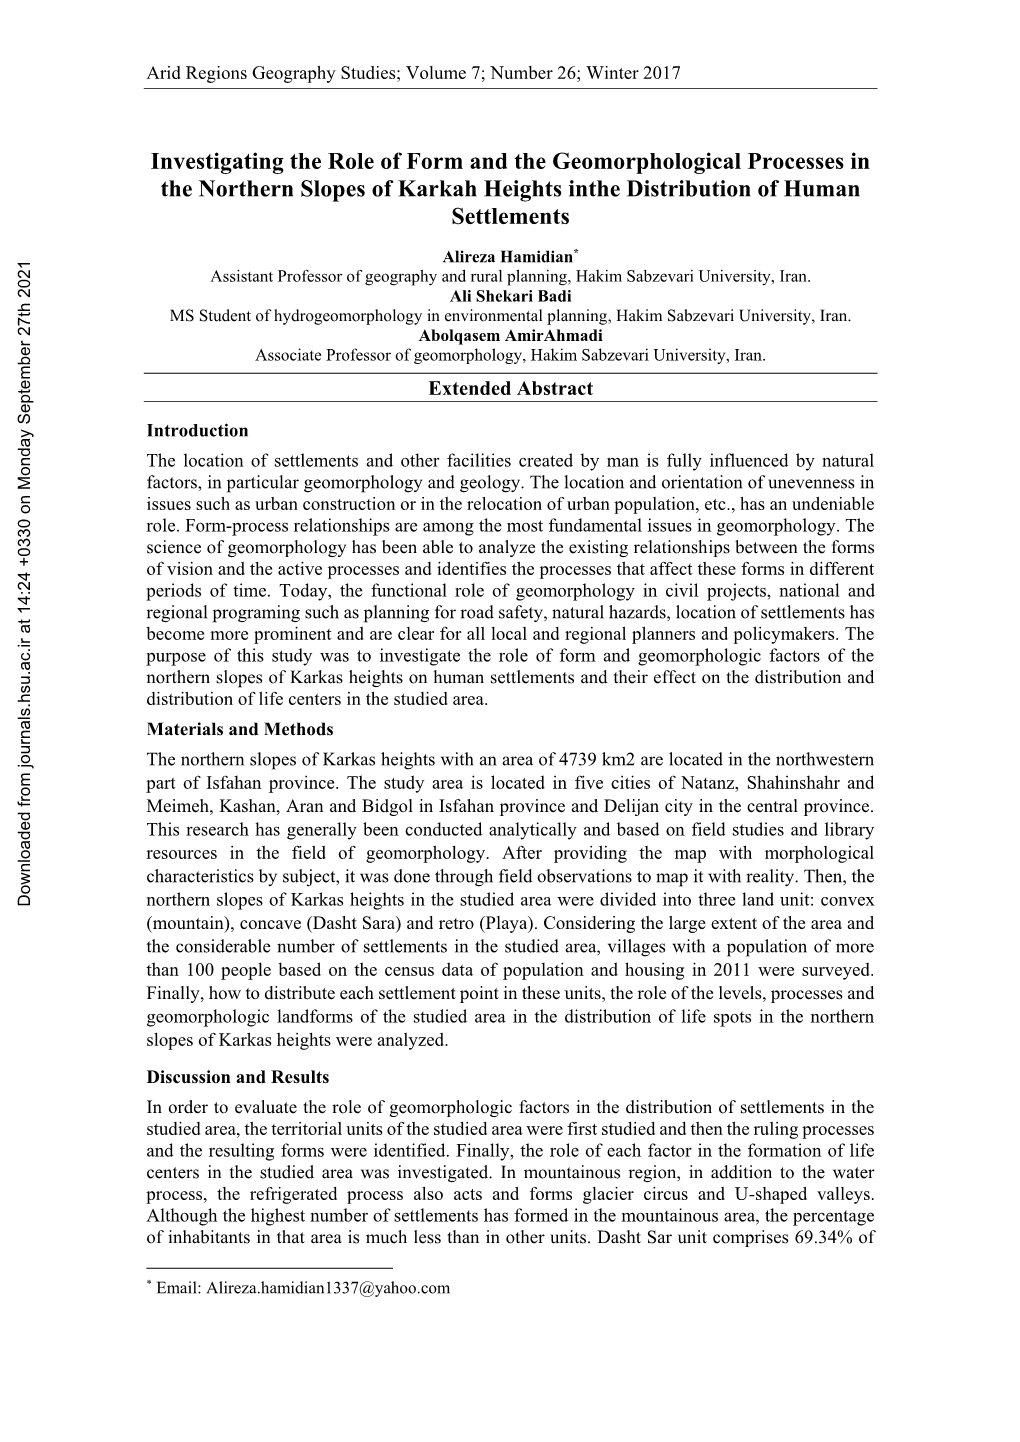 Evaluation of the Role of Form and Geomorphological Processes Of